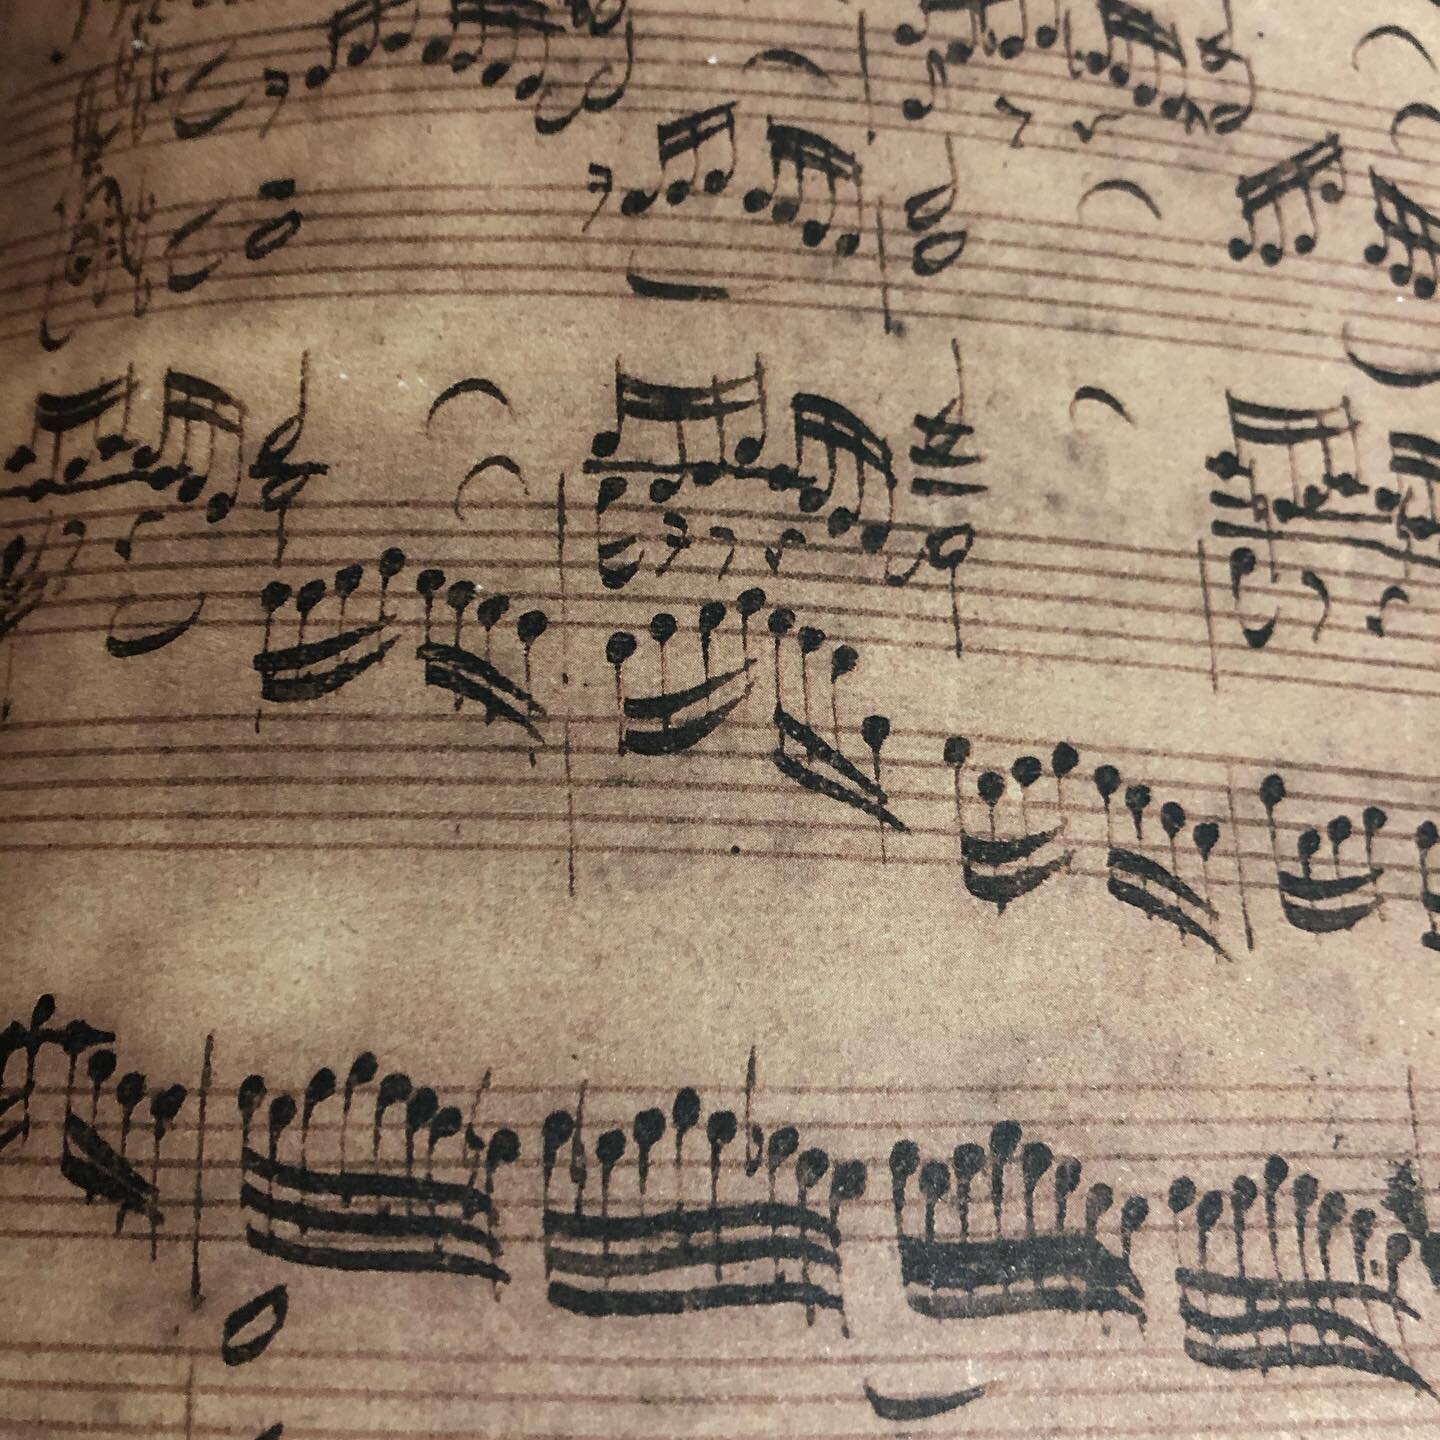 J S Bach&rsquo;s own hand - I love the way his notes dance on the page .. #bach #baroquemusic #beauty #prelude #fugue #glenngould